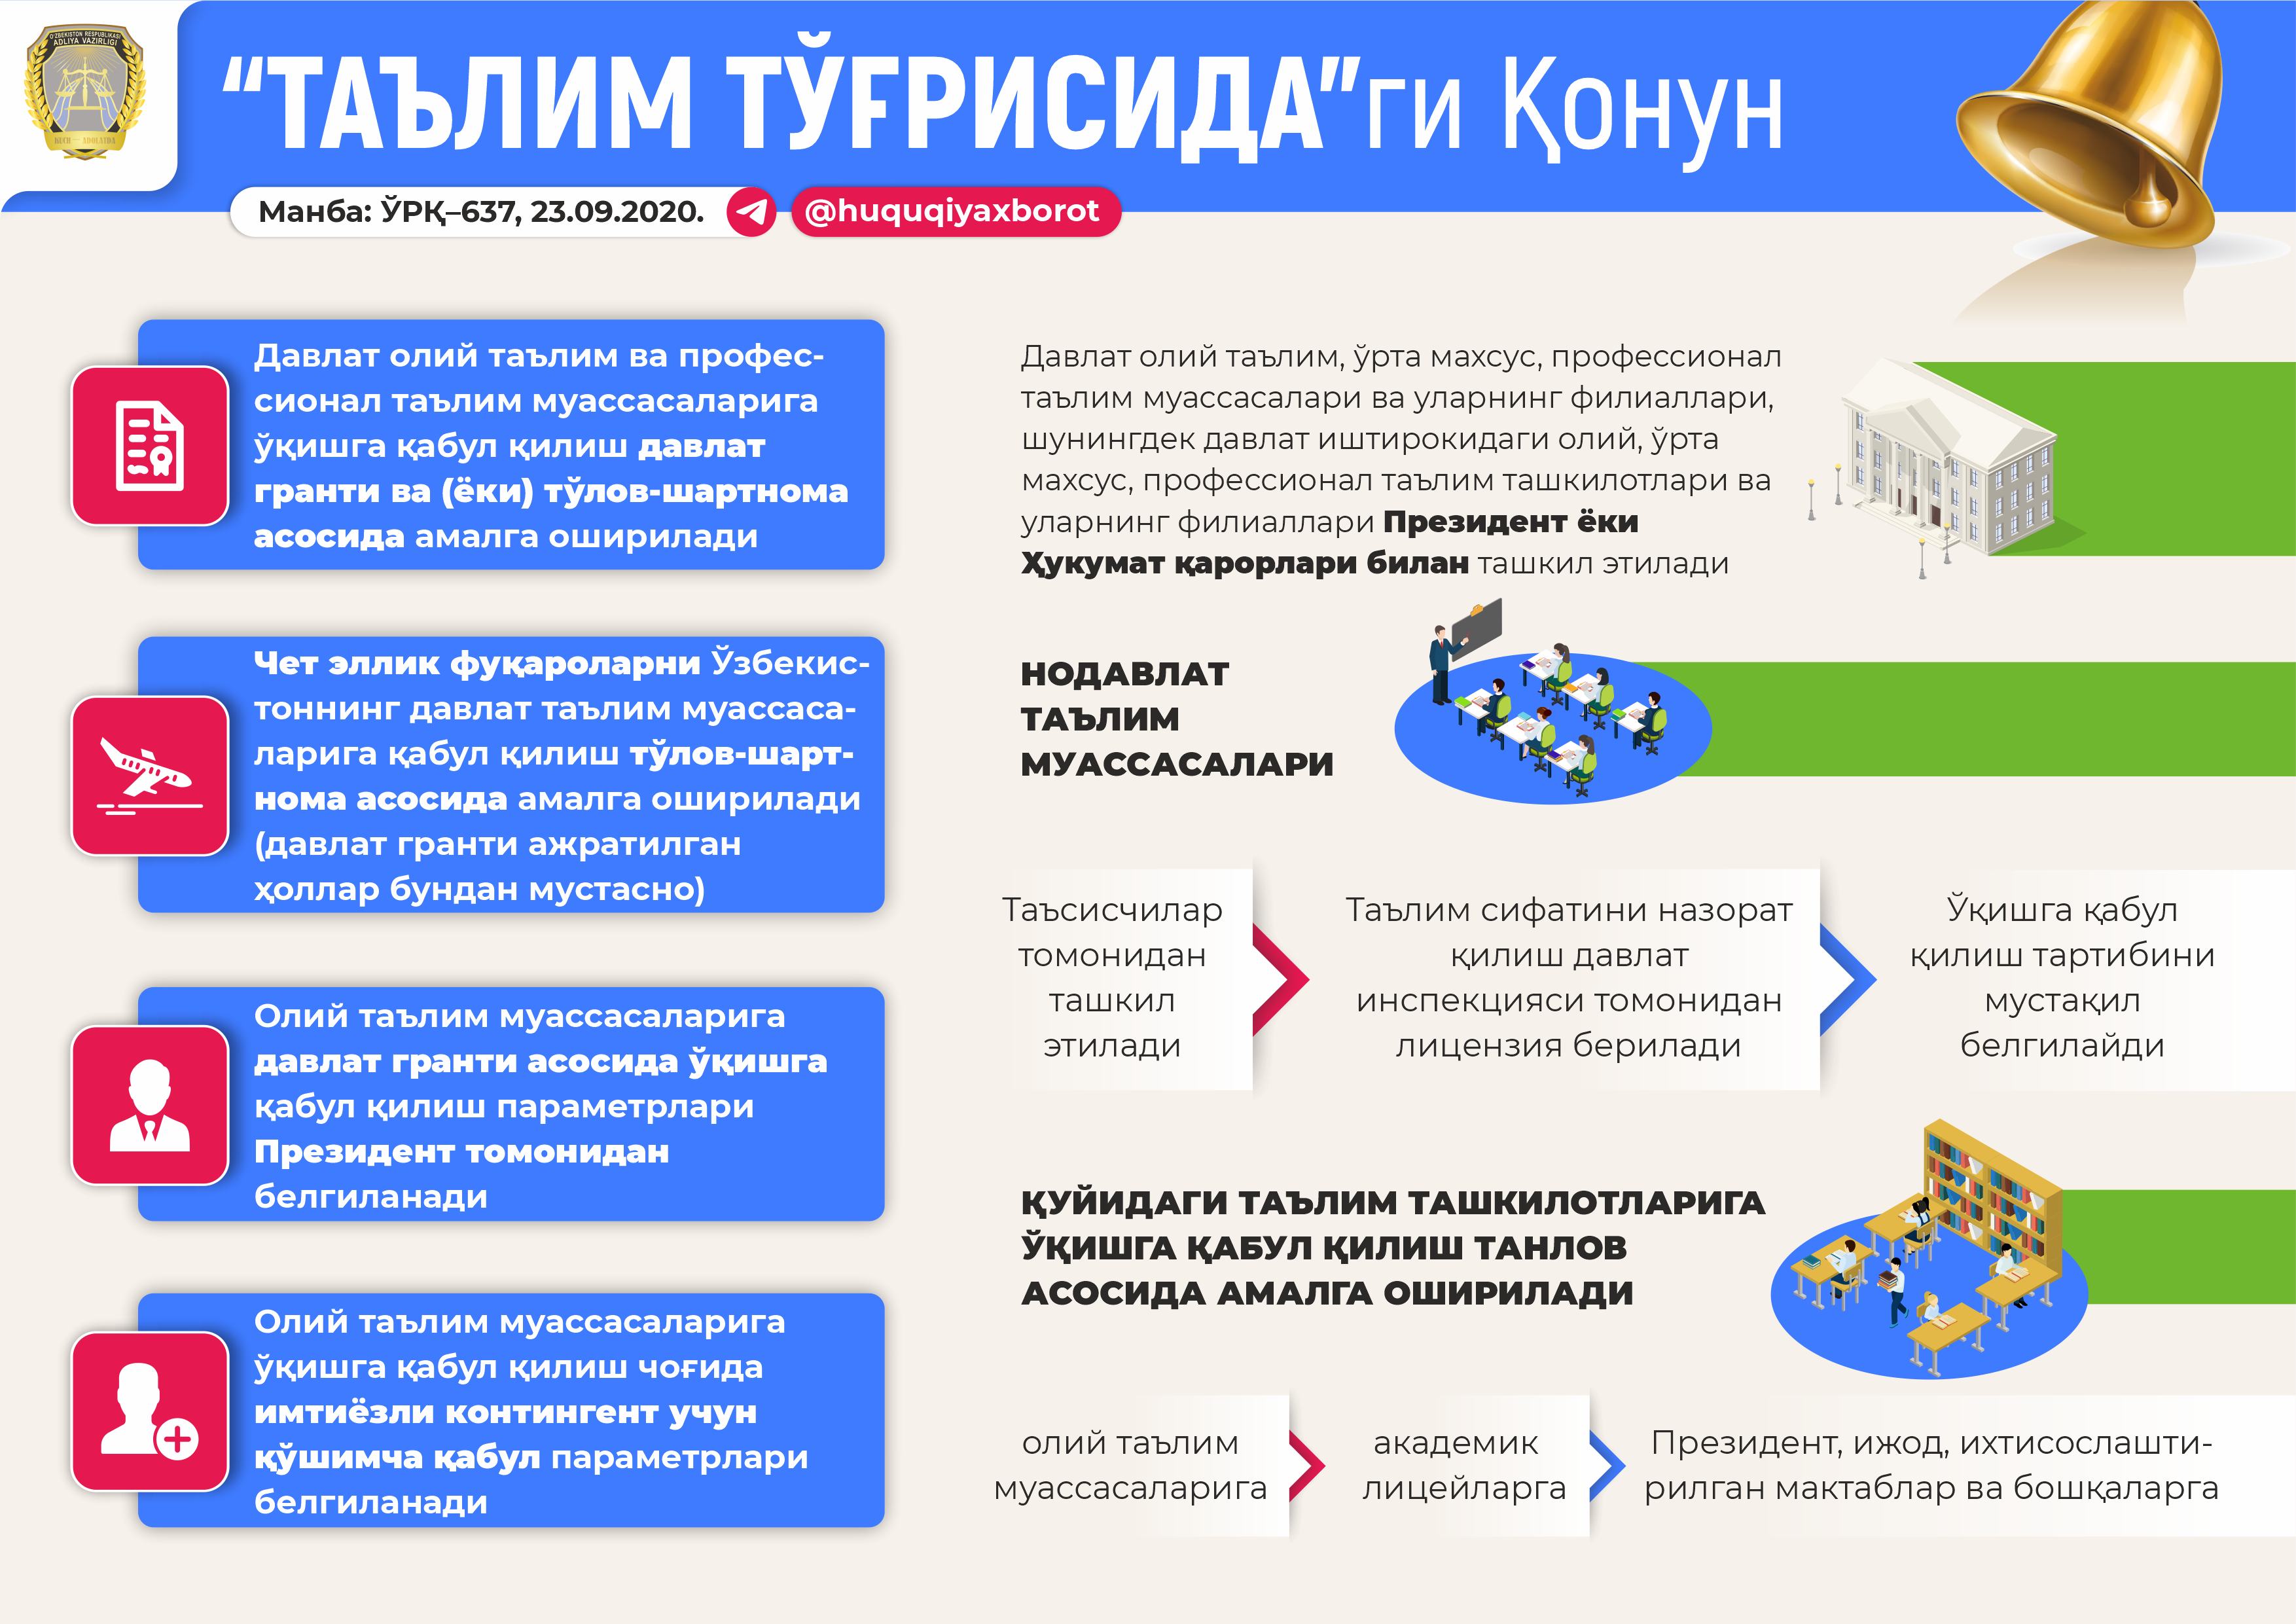 Legal basis for the activities of employees of the education system